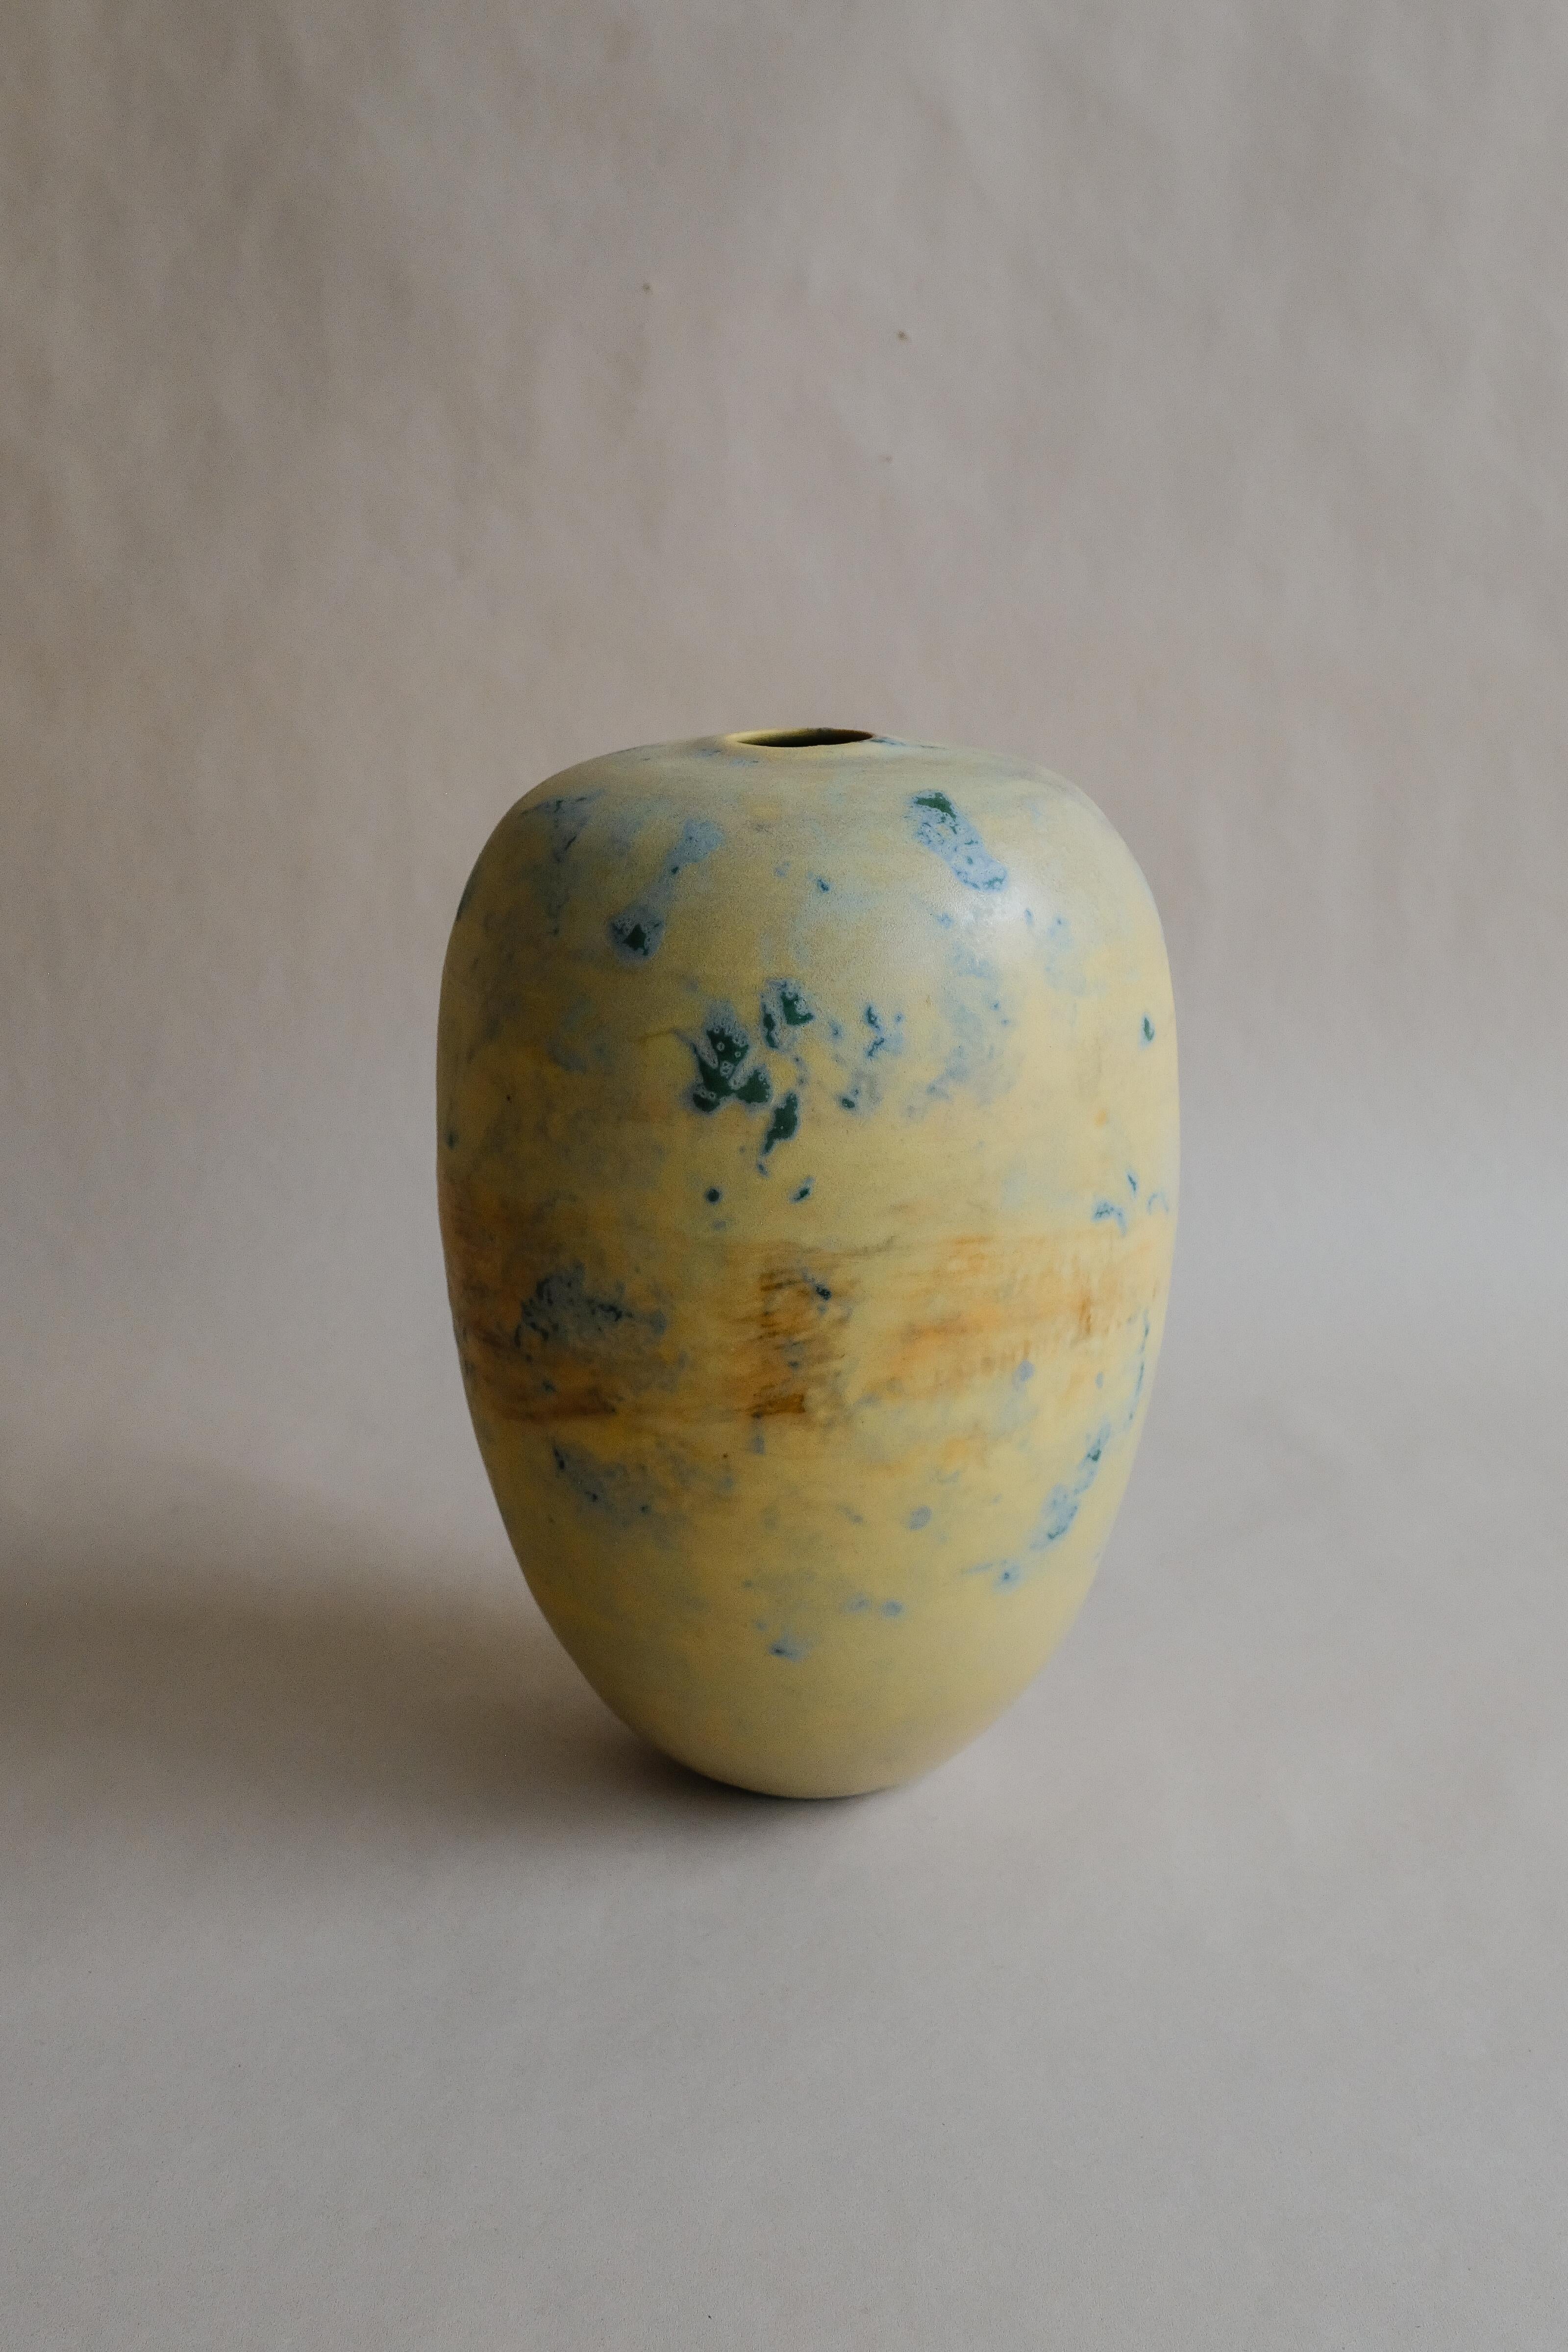 - Hand-thrown porcelain, featuring a proprietary, dimensional glaze fired in a high-fired gas kiln
- Organic rounded silhouette
- Form is inspired by the sapoche
- 1-inch opening
- Designed and made in NYC by Vy Voi
- Vy Voi designs are crafted